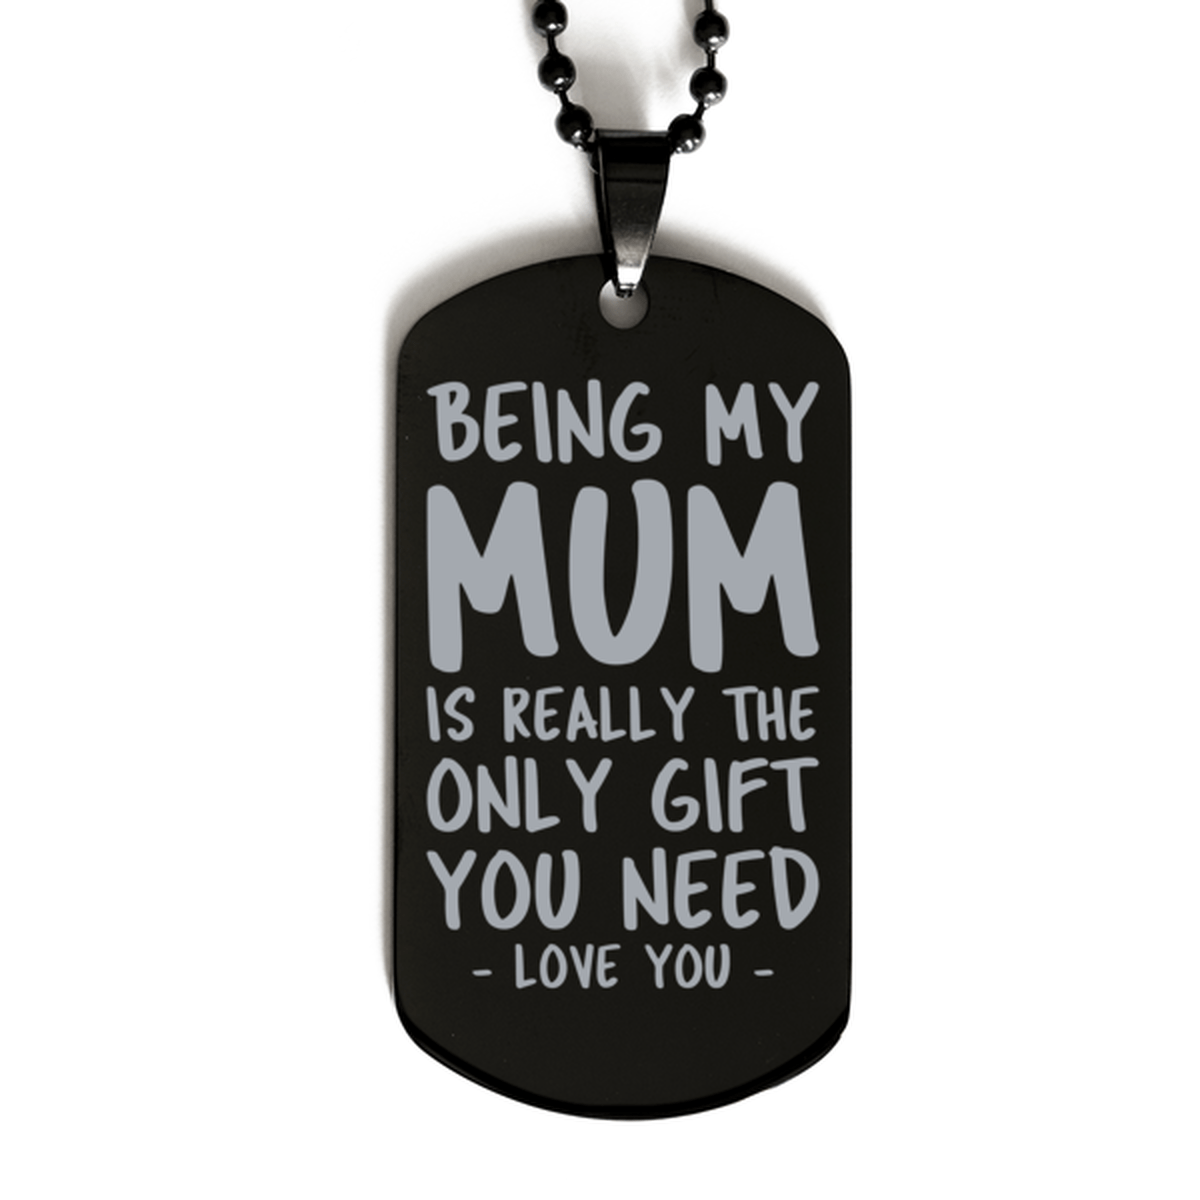 Funny Mum Black Dog Tag Necklace, Being My Mum Is Really the Only Gift You Need, Best Birthday Gifts for Mum